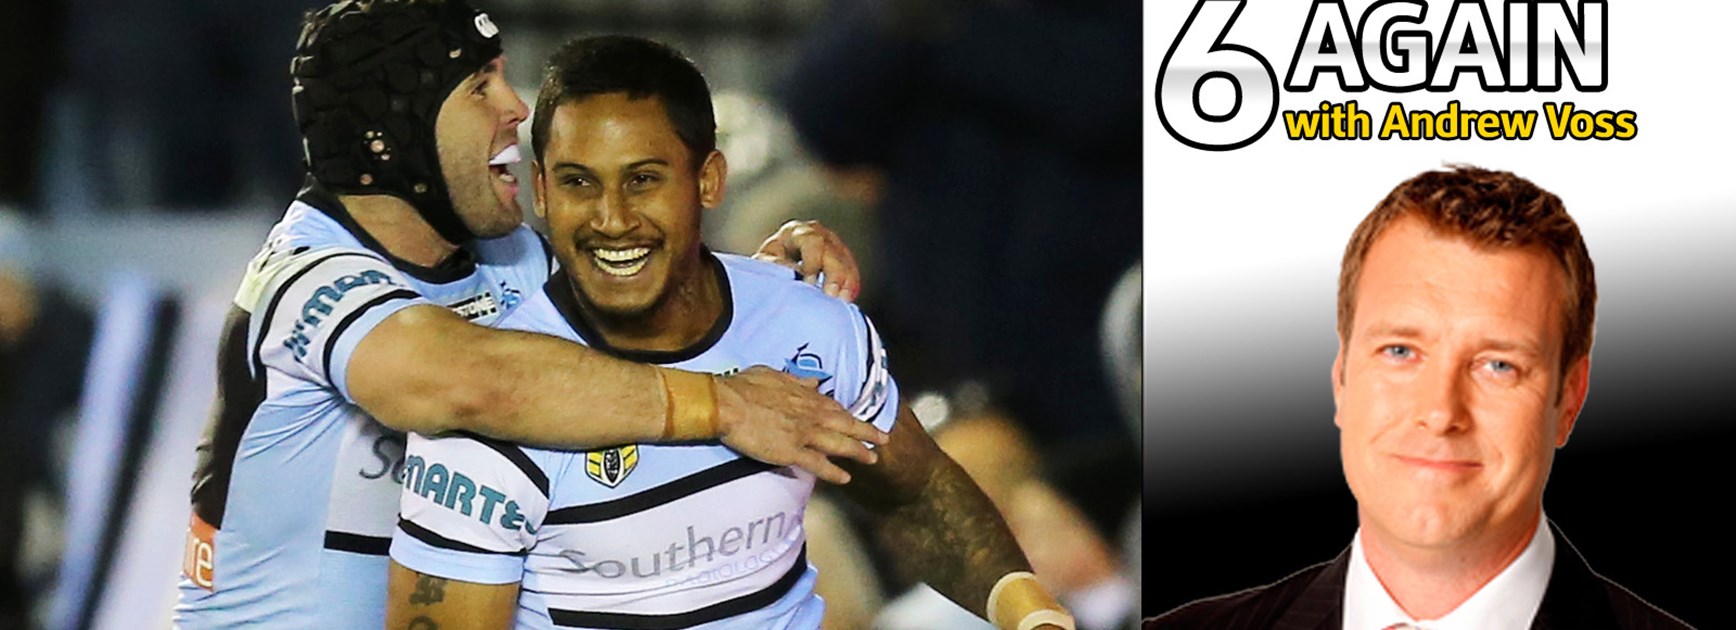 Where to next for Ben Barba, asks Andrew Voss.